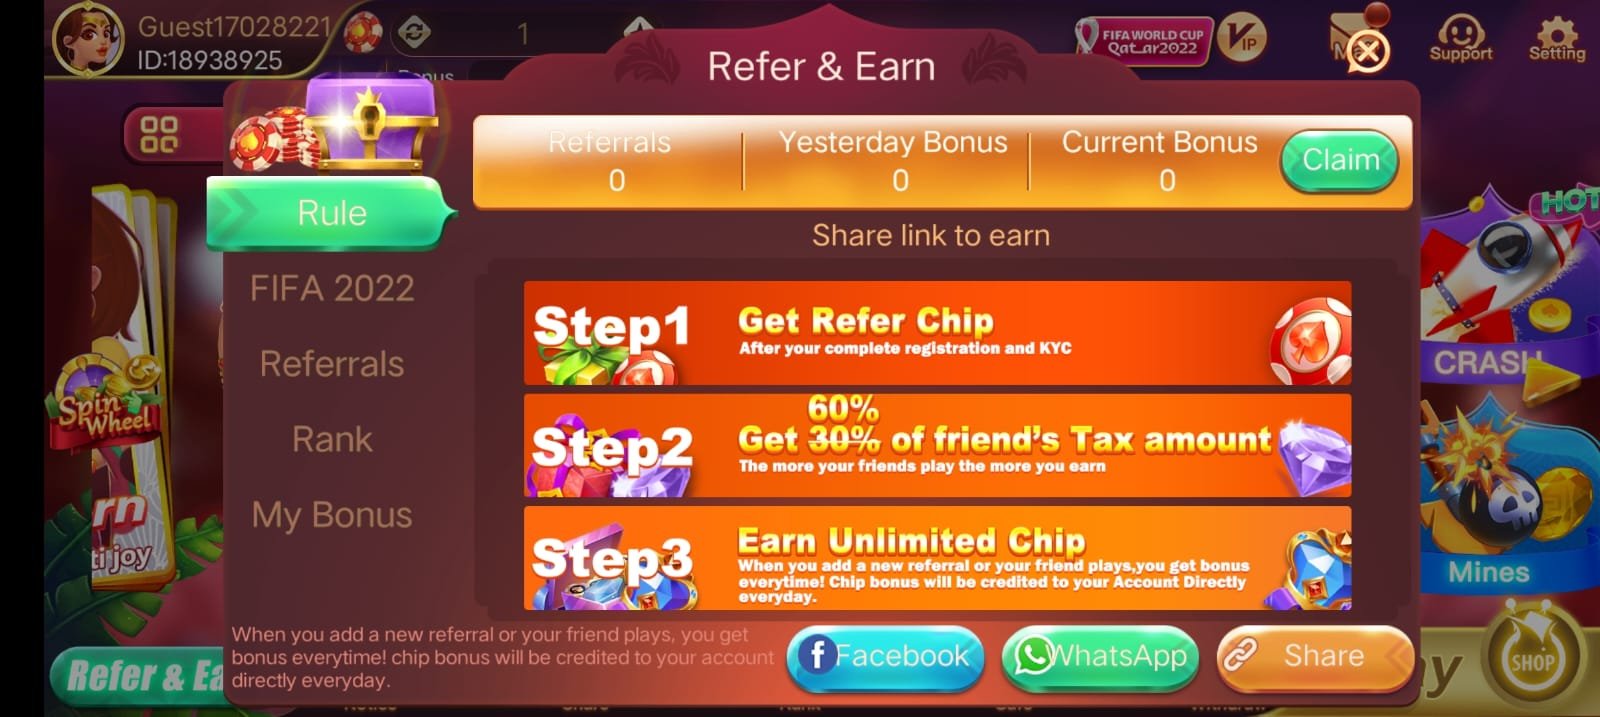 How To Refer And Earn Money In Teen Patti Star Apk